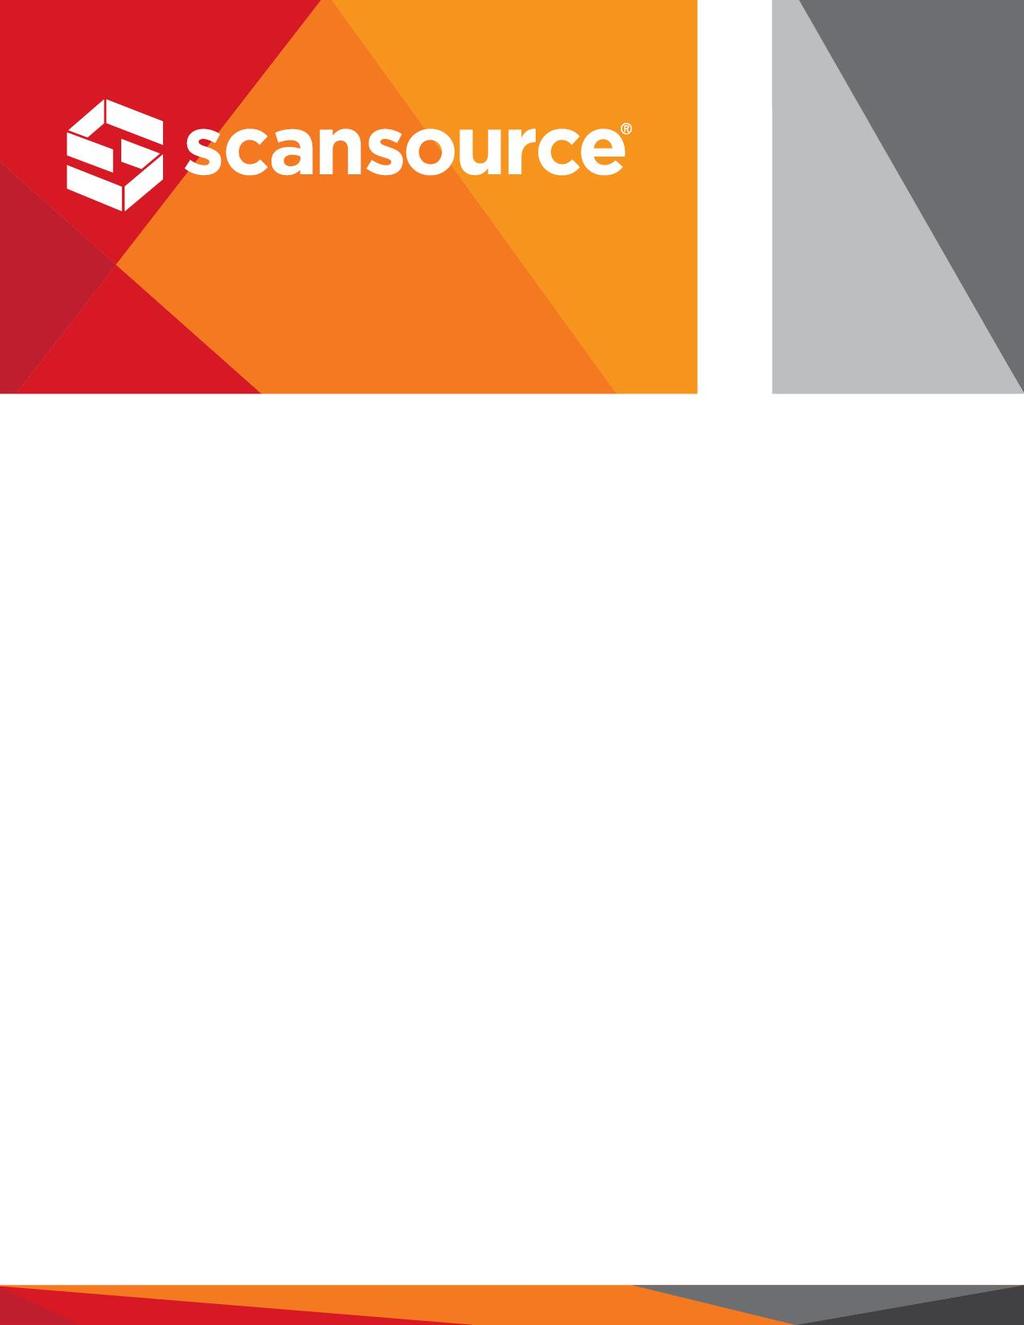 Q2 FY 2018 FINANCIAL INFORMATION AND CONFERENCE CALL Please see the accompanying earnings press release available at www.scansource.com in the Investor Relations section.